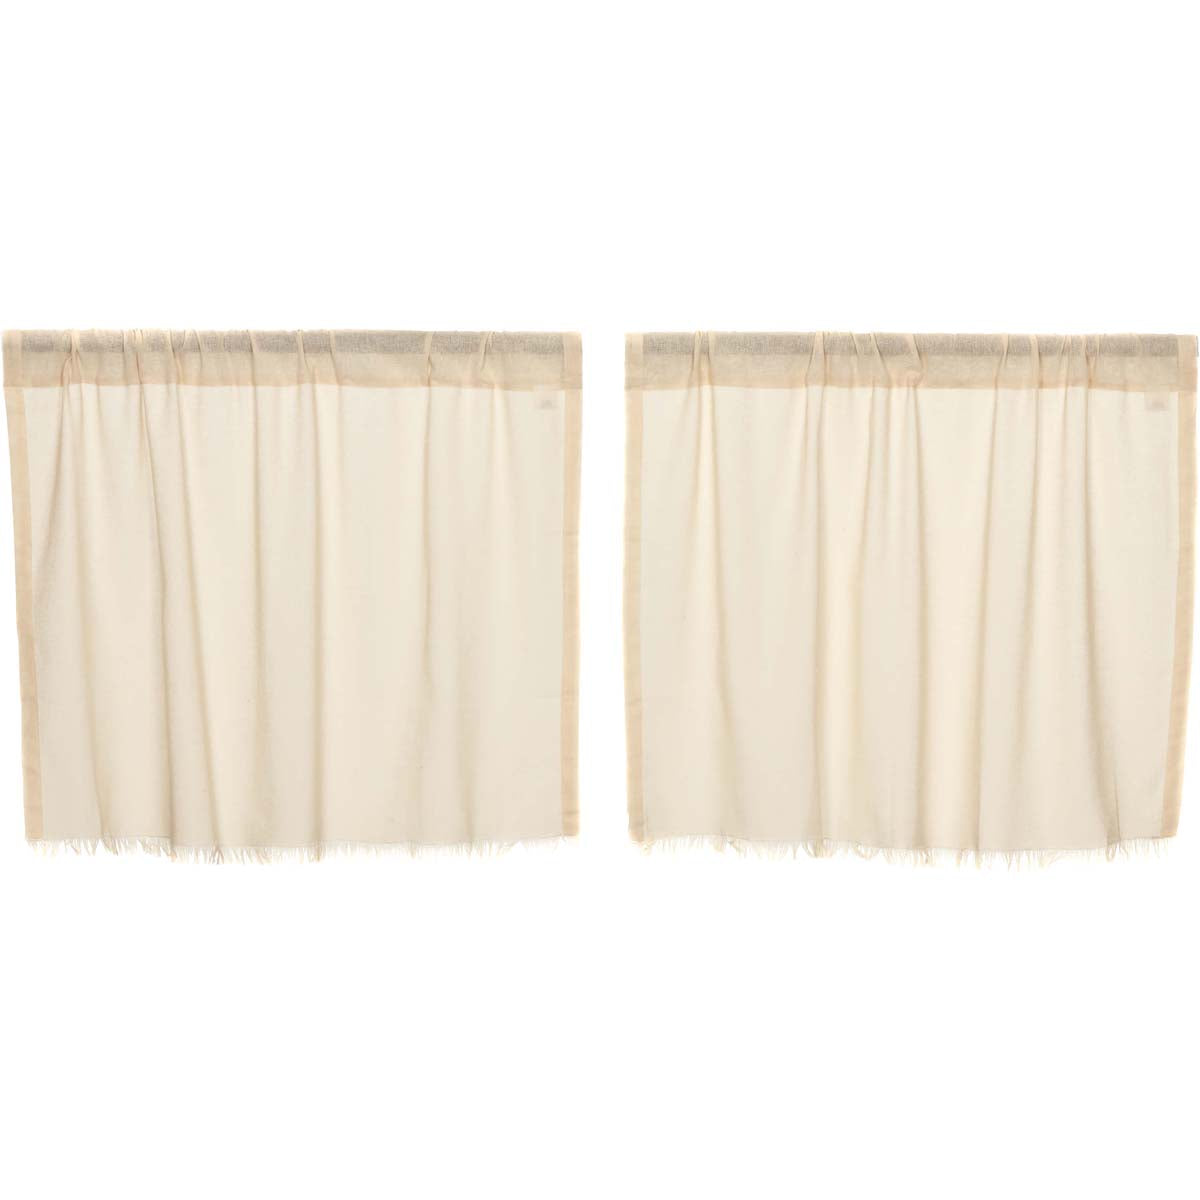 April & Olive Tobacco Cloth Natural Tier Fringed Set of 2 L24xW36 By VHC Brands